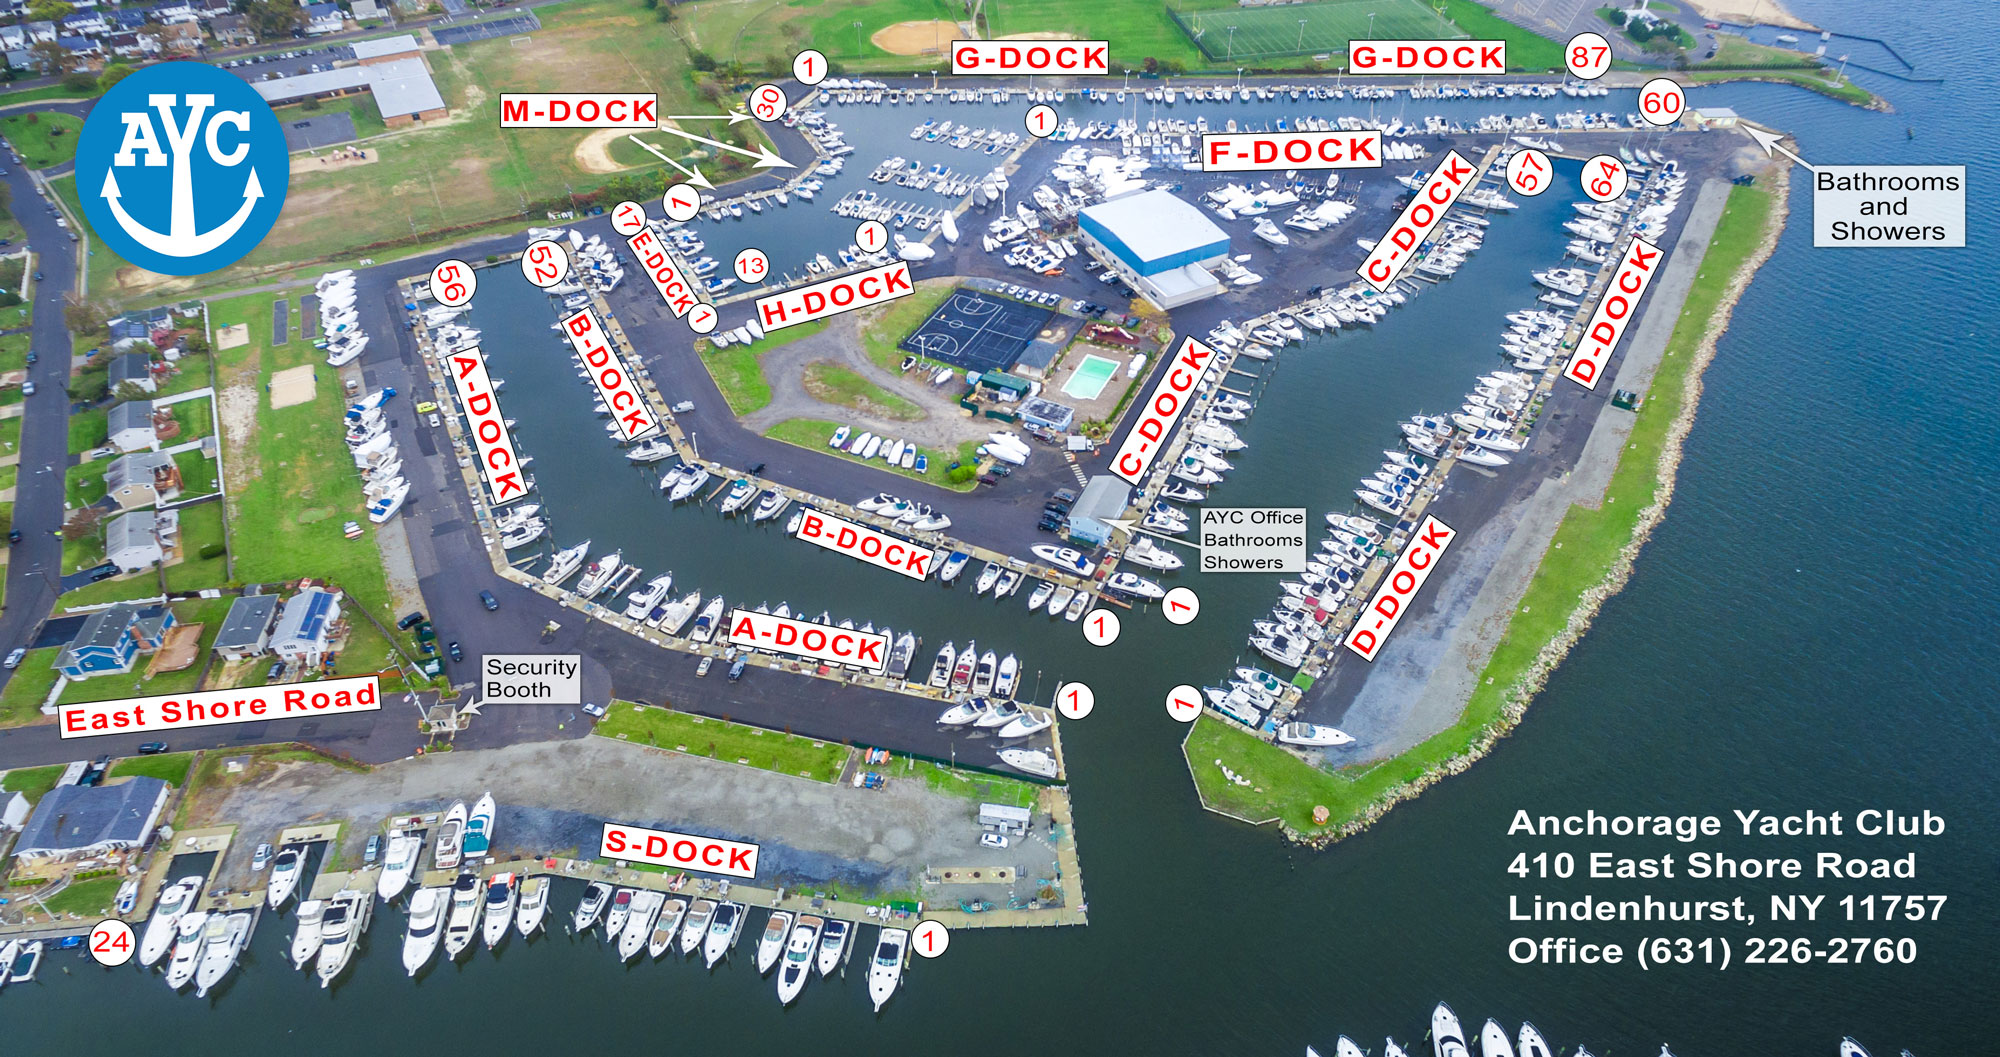 Graphic of boat slip parking made for Anchorage Yacht Club by Boheema.com